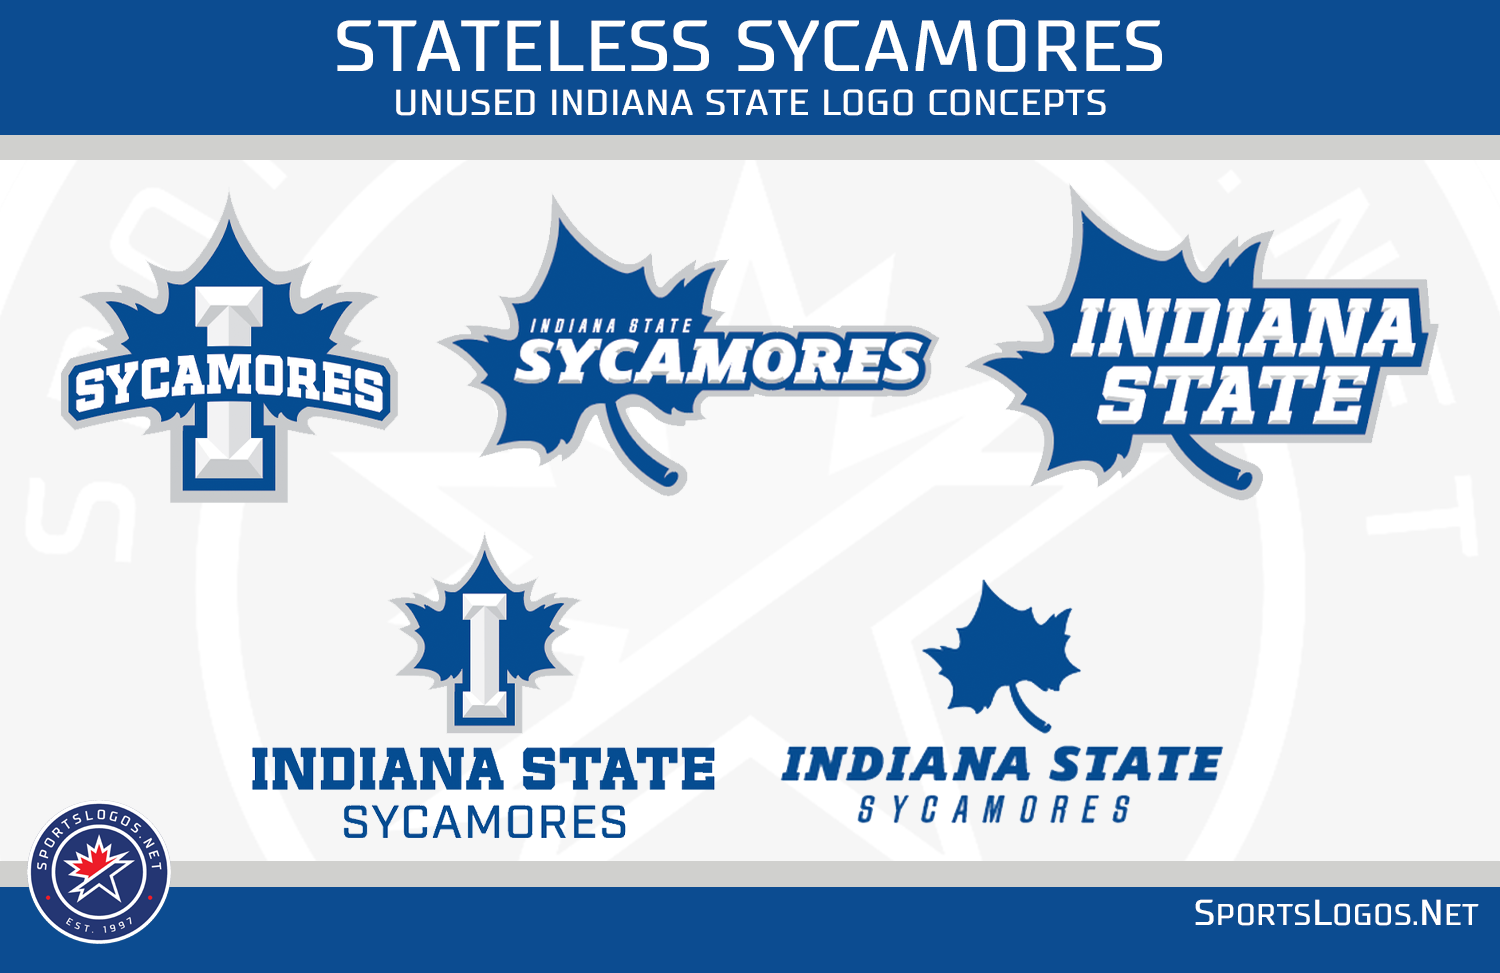 Indiana State Sycamores Introduce New Athletic Branding – SportsLogos